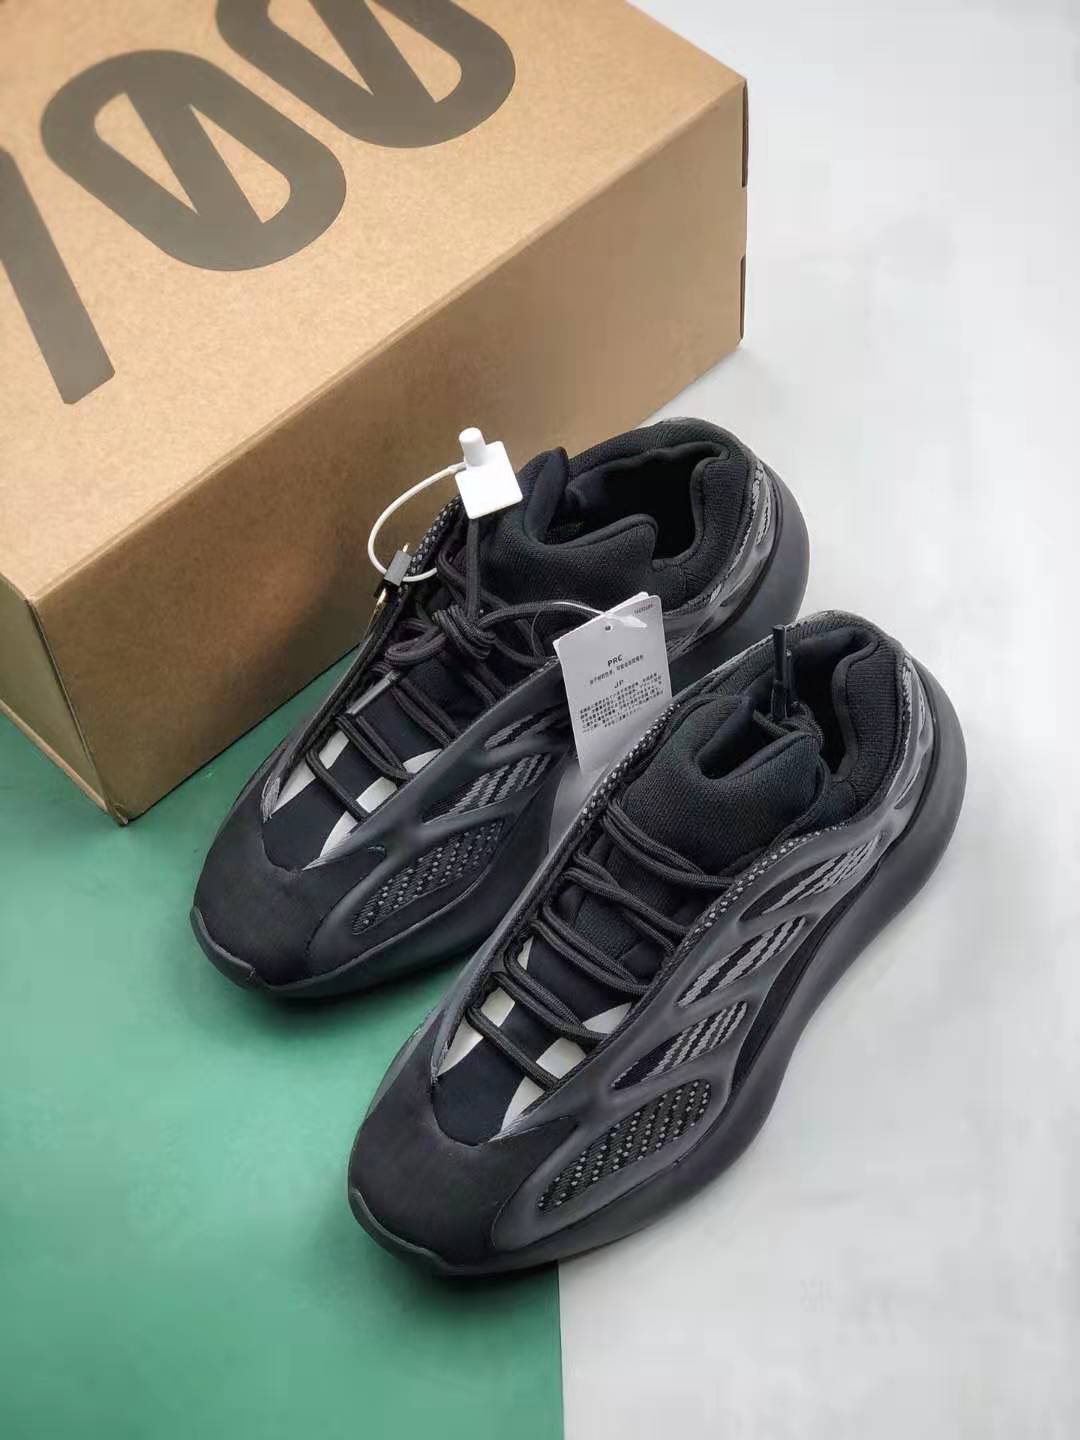 Adidas Yeezy 700 V3 Alvah H67799 - Sleek and Stylish Footwear for Sneaker Enthusiasts!